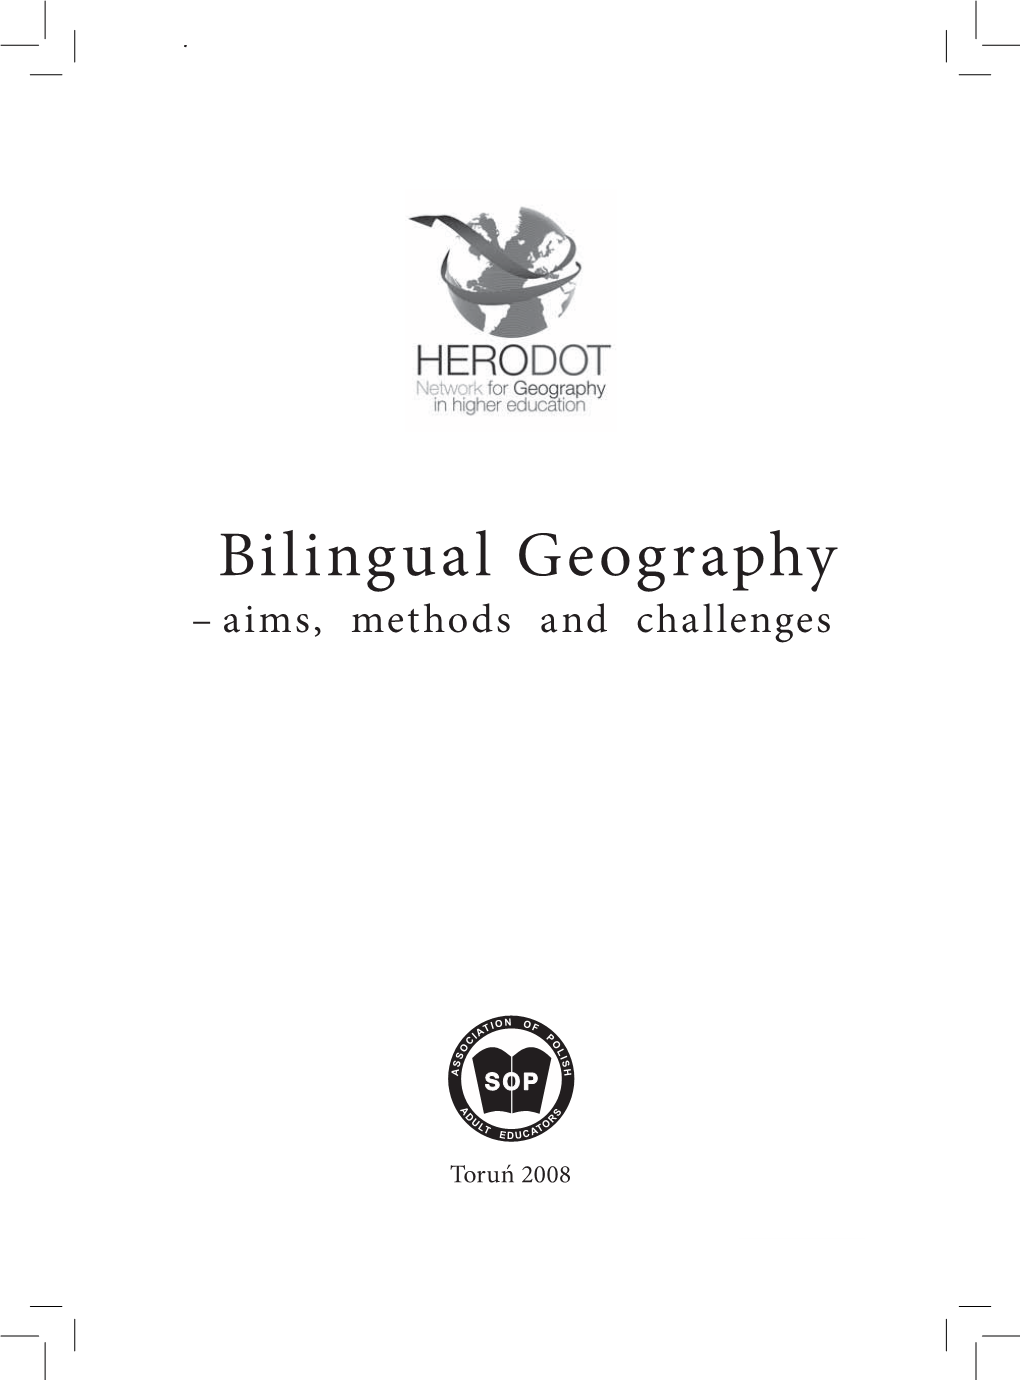 Bilingual Geography Aims, Methods and Challenges